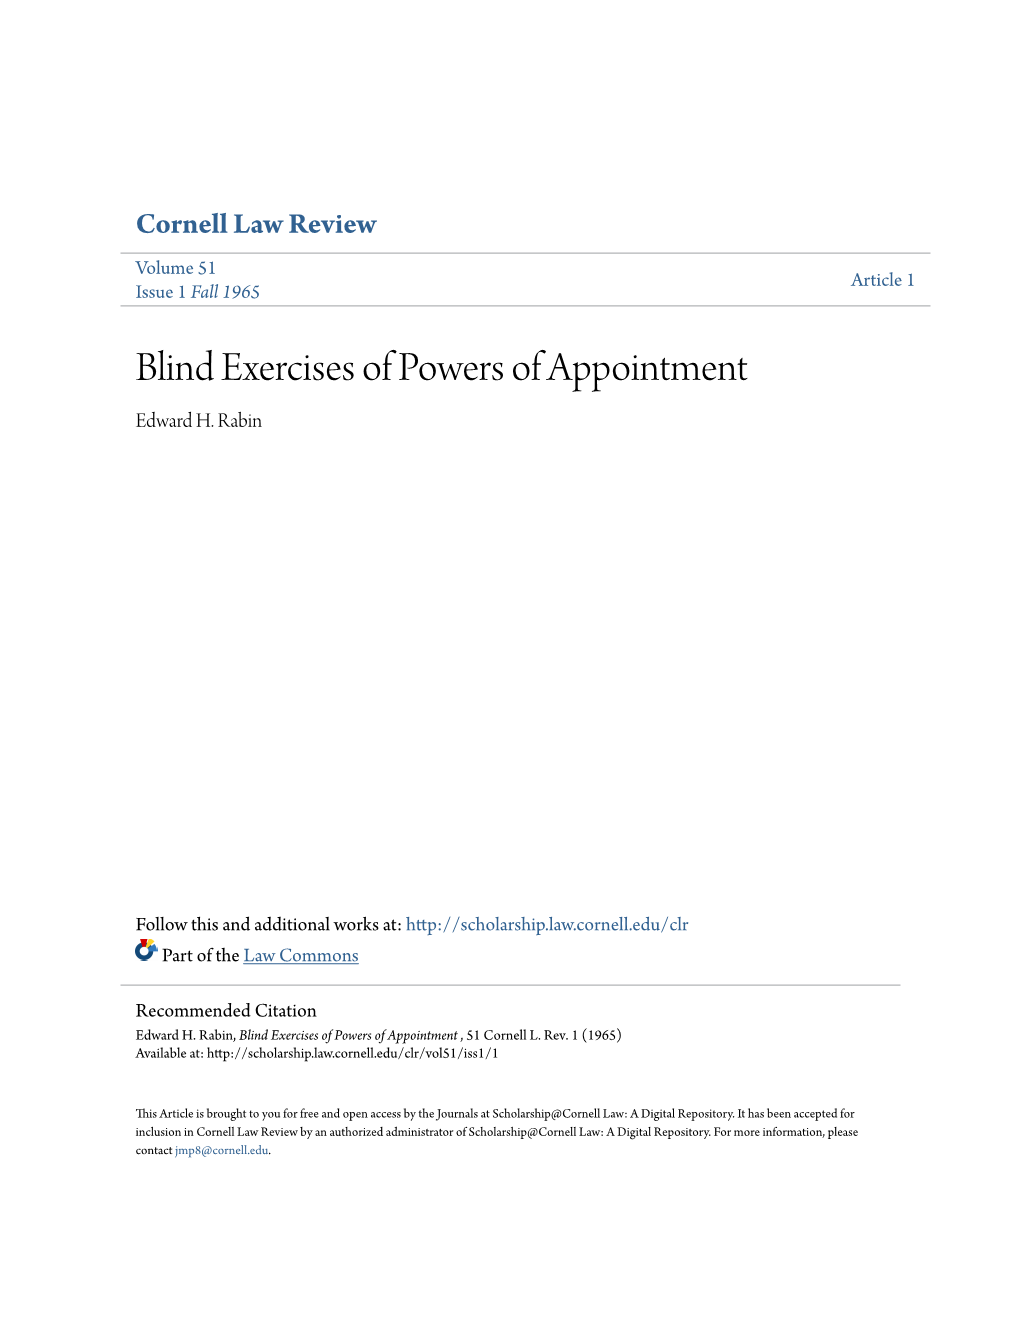 Blind Exercises of Powers of Appointment Edward H